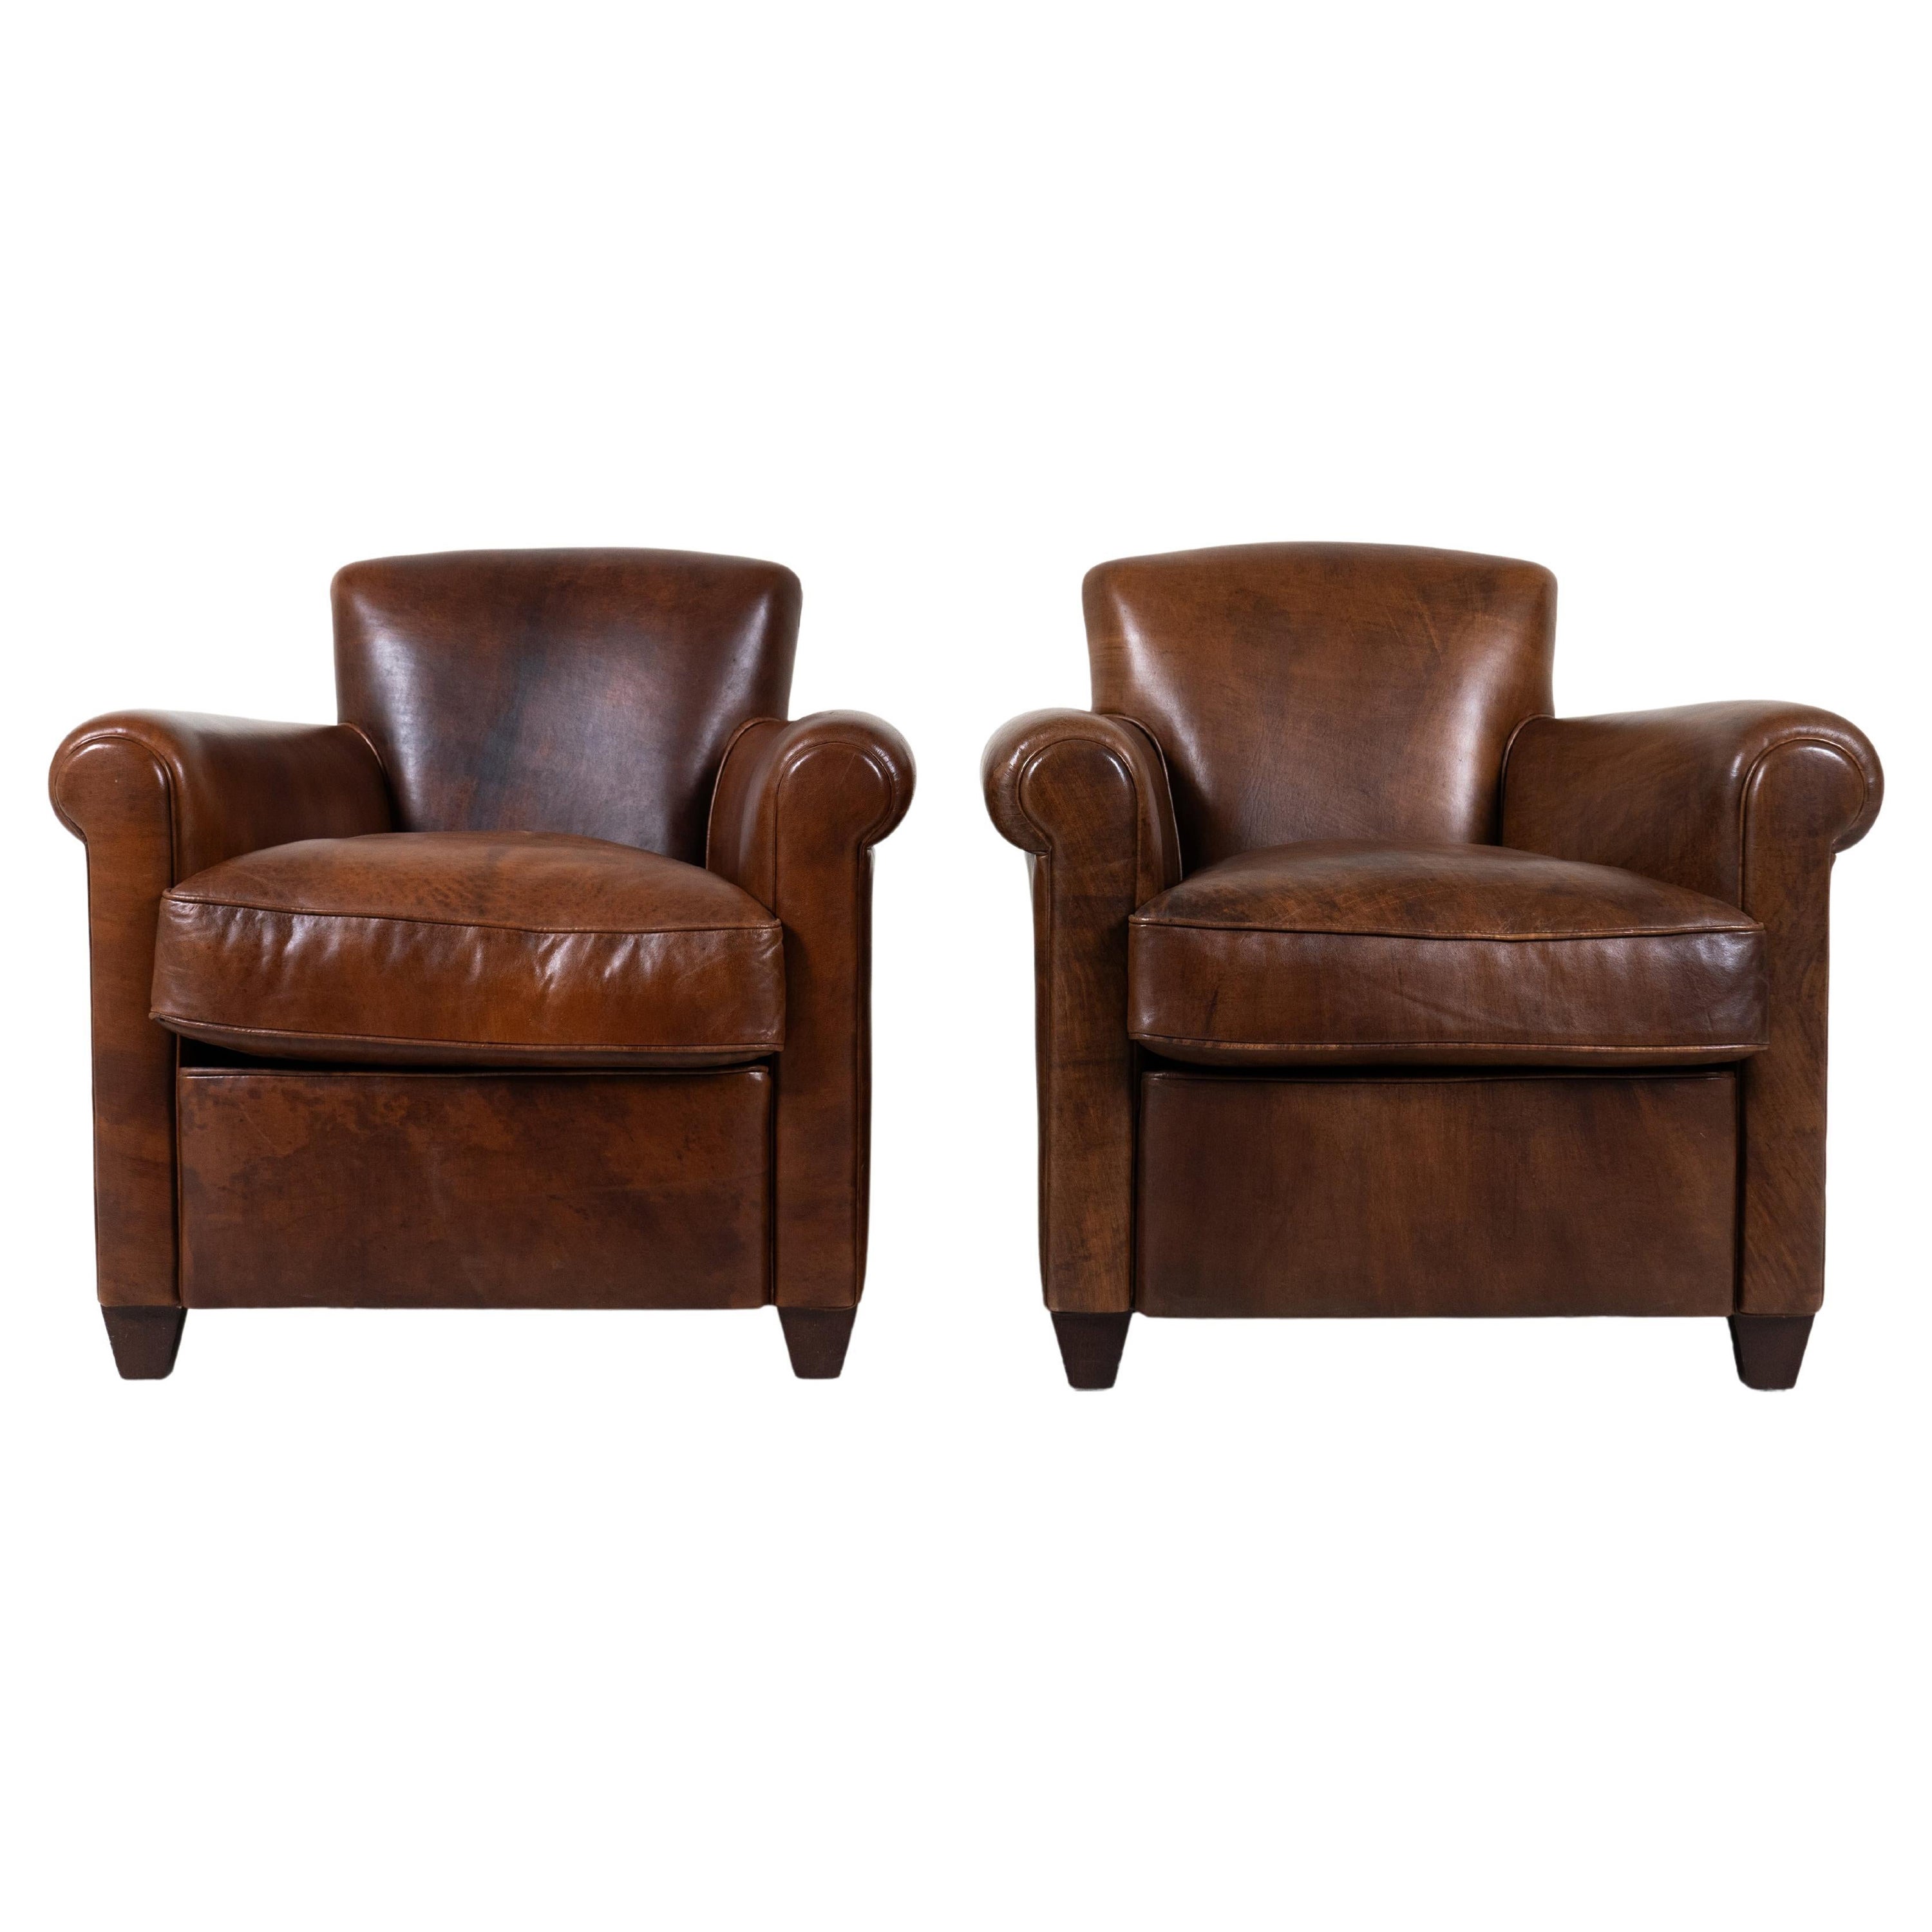 A Pair of Lamb Leather Chairs, France Newly Made